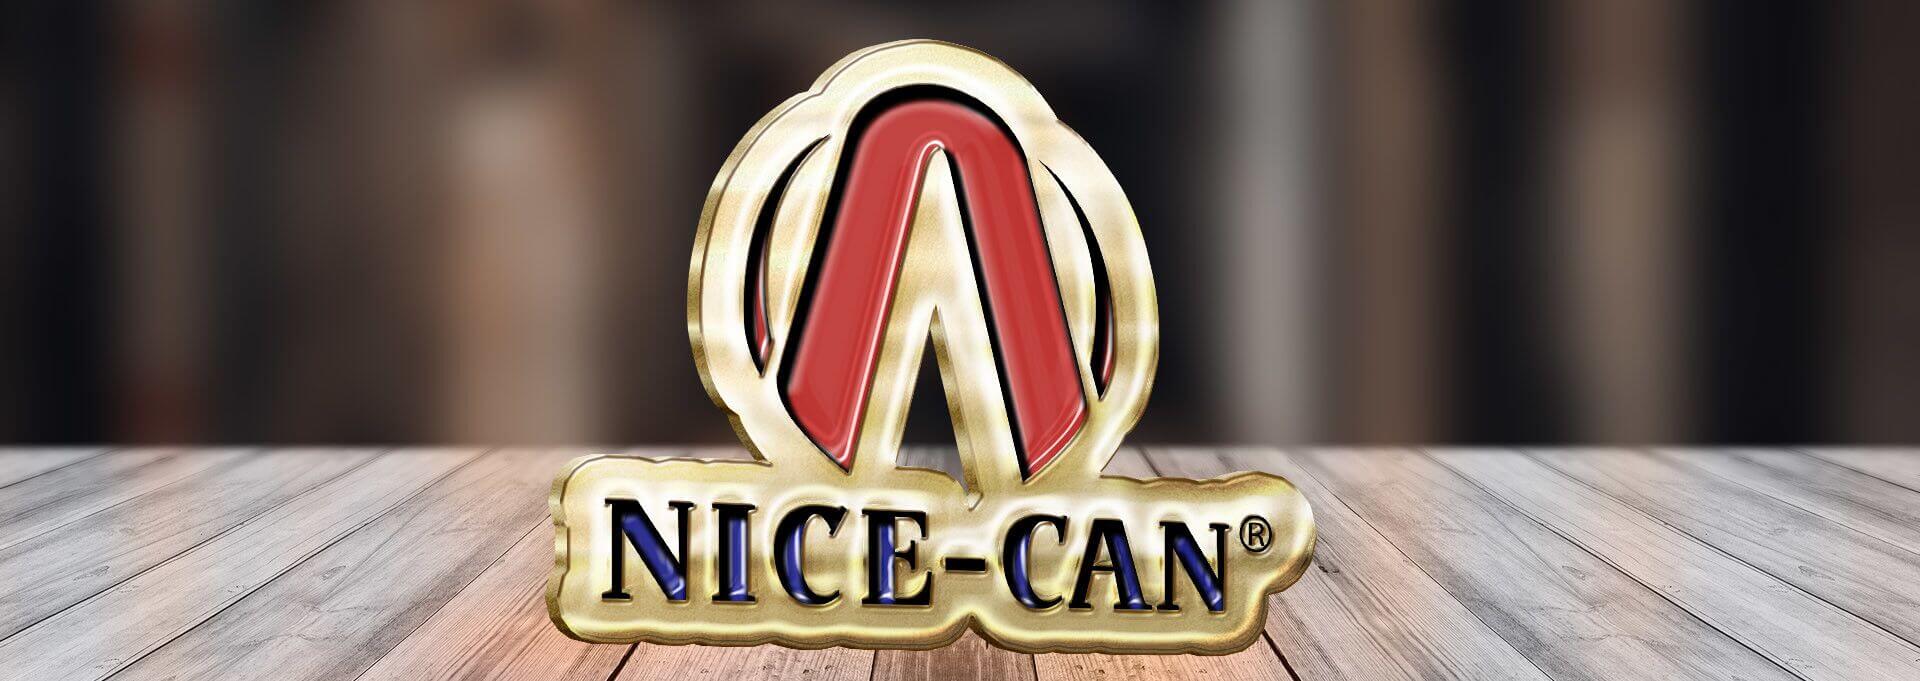 Nice-Can Manufacturing Co. Ltd